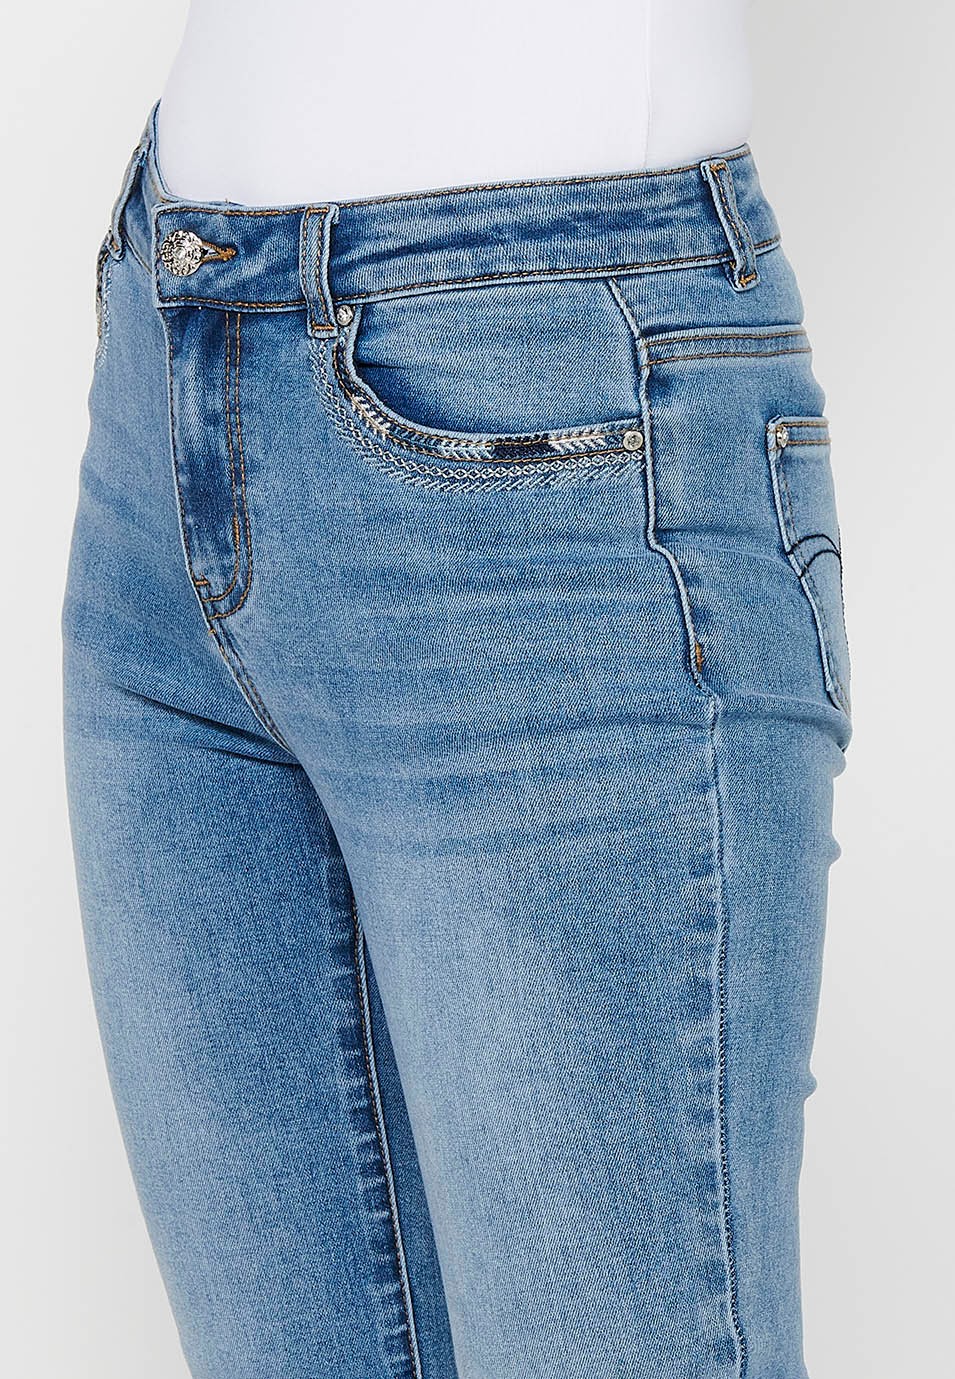 Long denim pants with embroidered details with front closure with zipper and button in Blue for Women 6